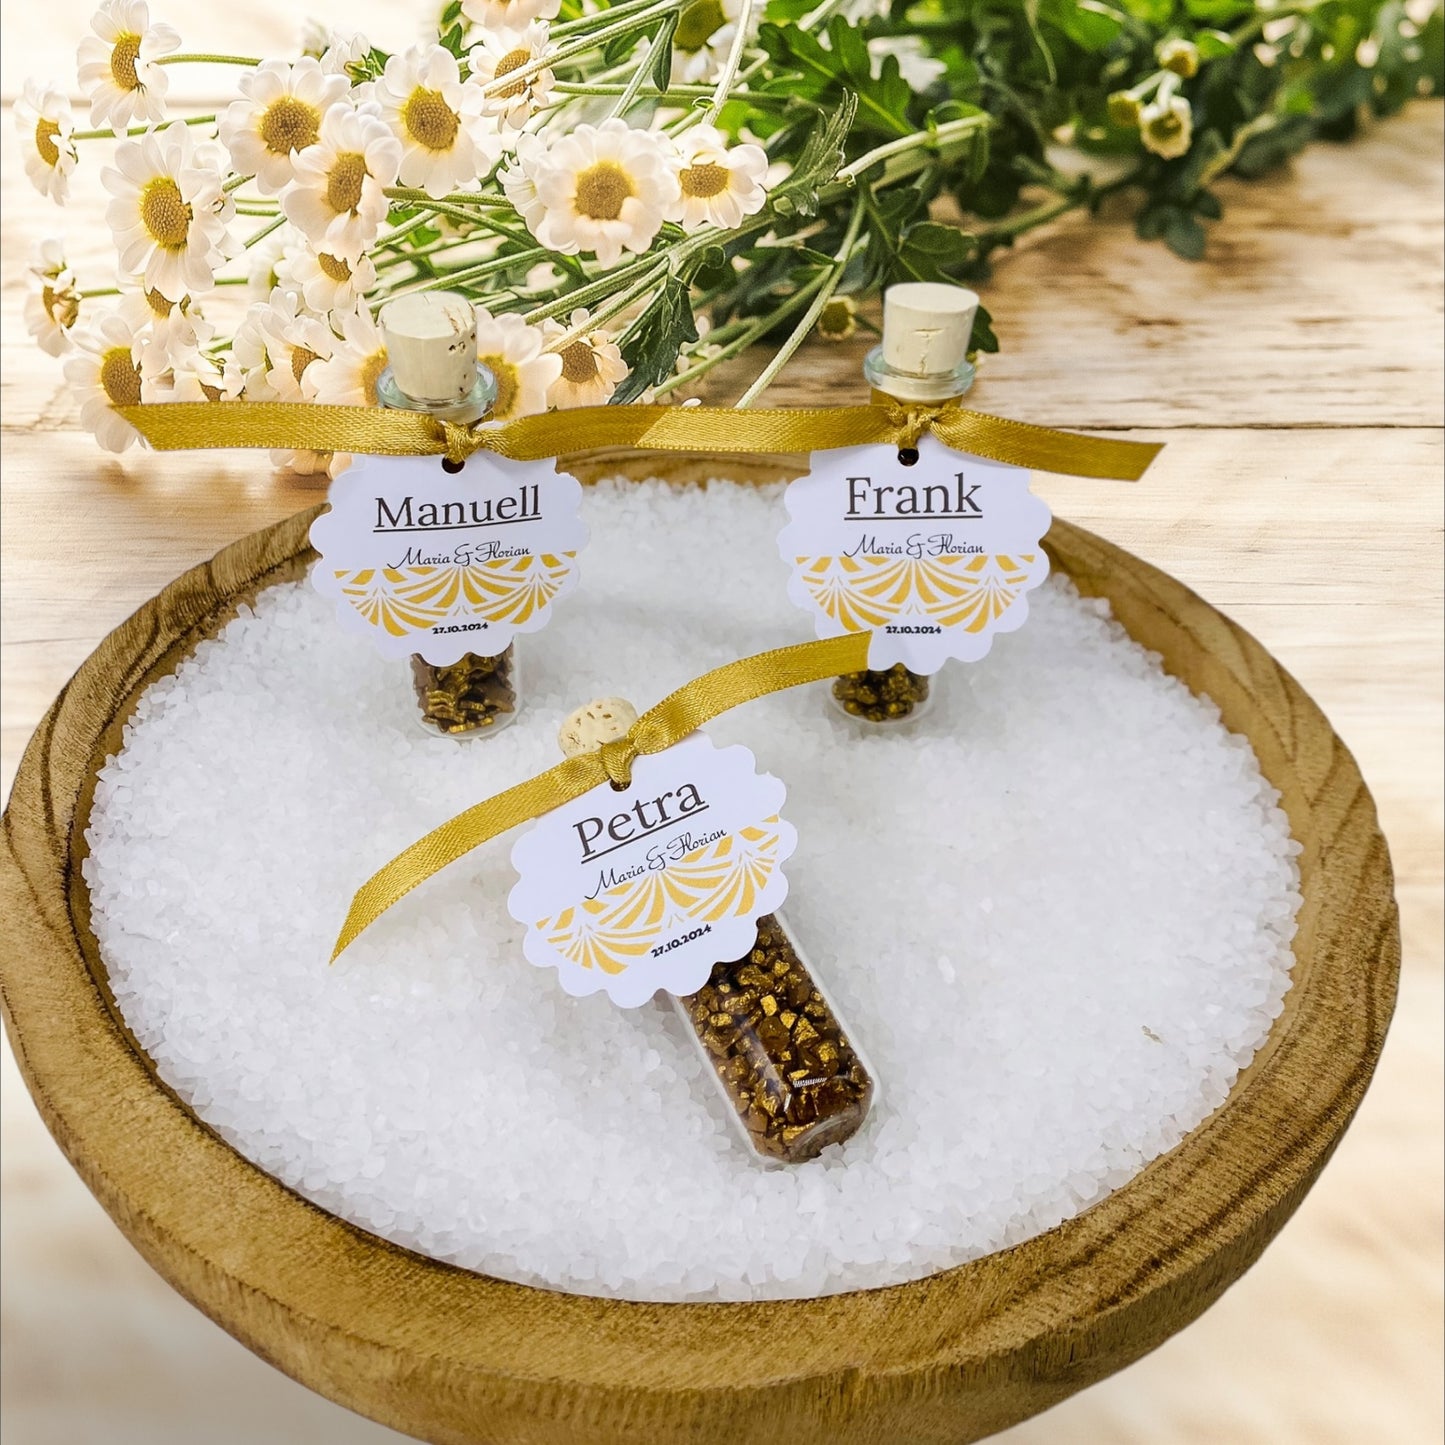 Guest gift gold shine: Personalized ship glasses as elegant place cards for lasting memories!